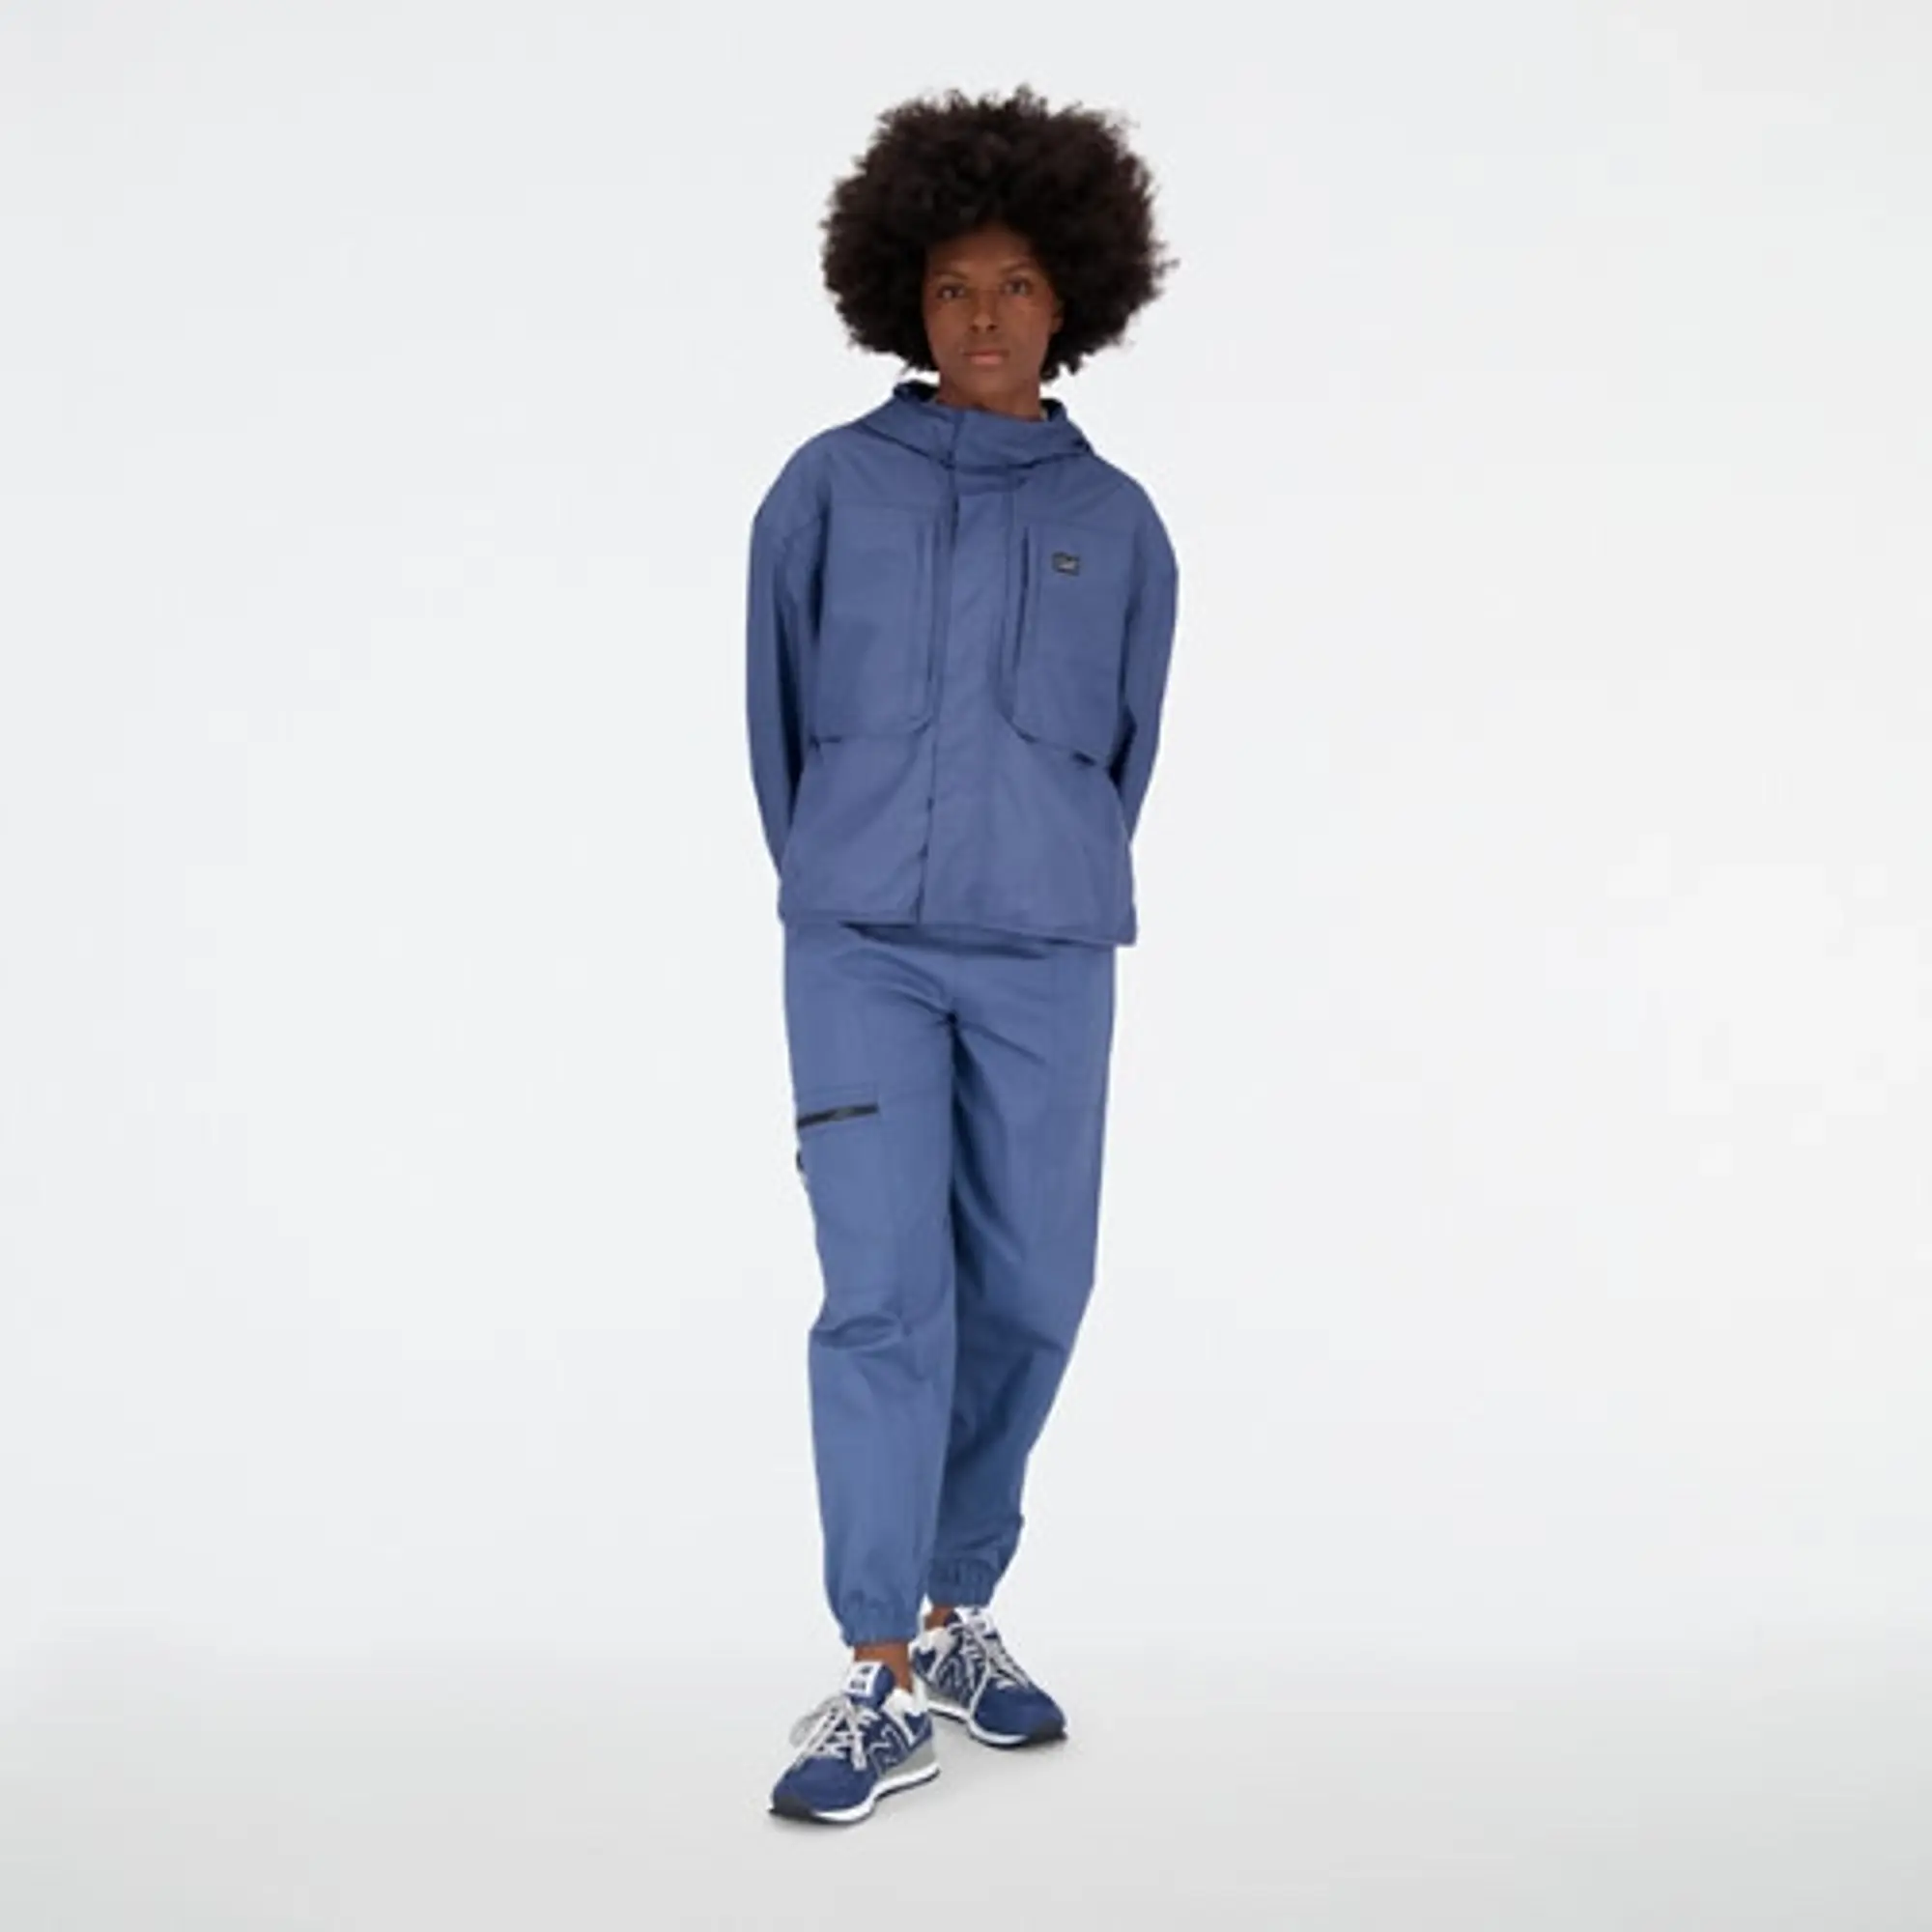 New Balance Women's AT Woven Pant in Blue Polywoven